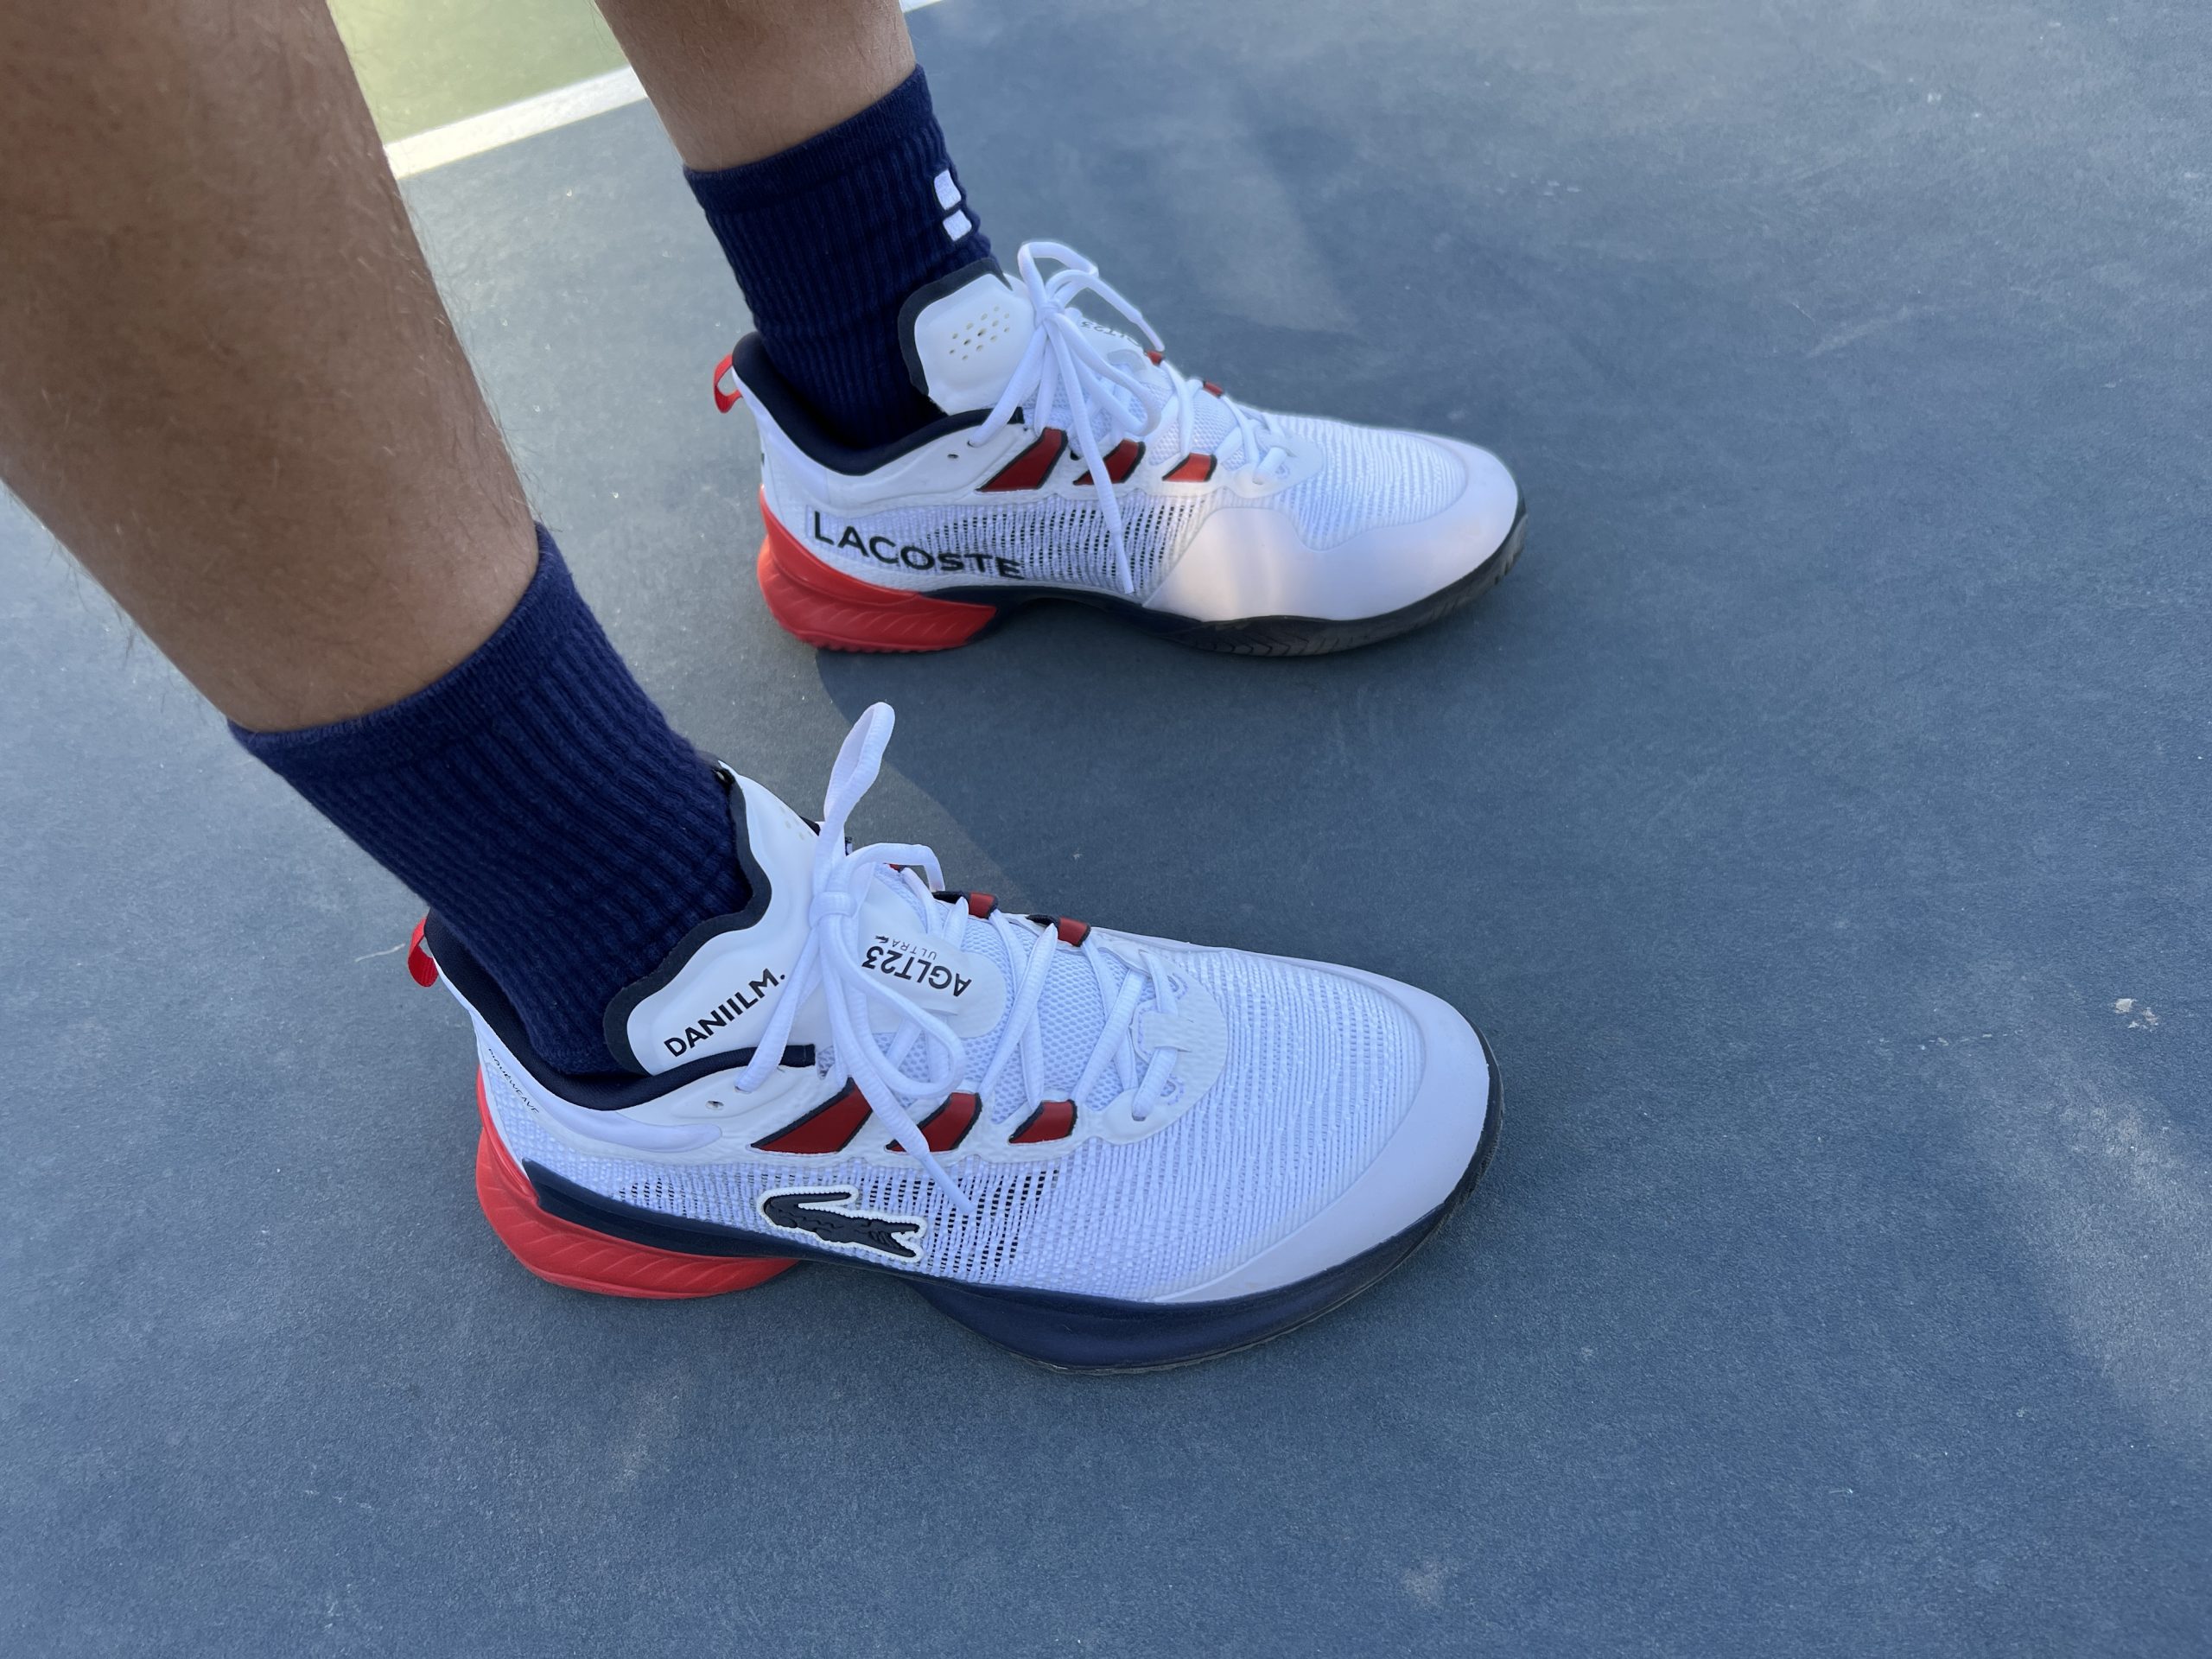 adidas Replaces Iconic Barricades with New Court Tennis Shoes - TENNIS  EXPRESS BLOG